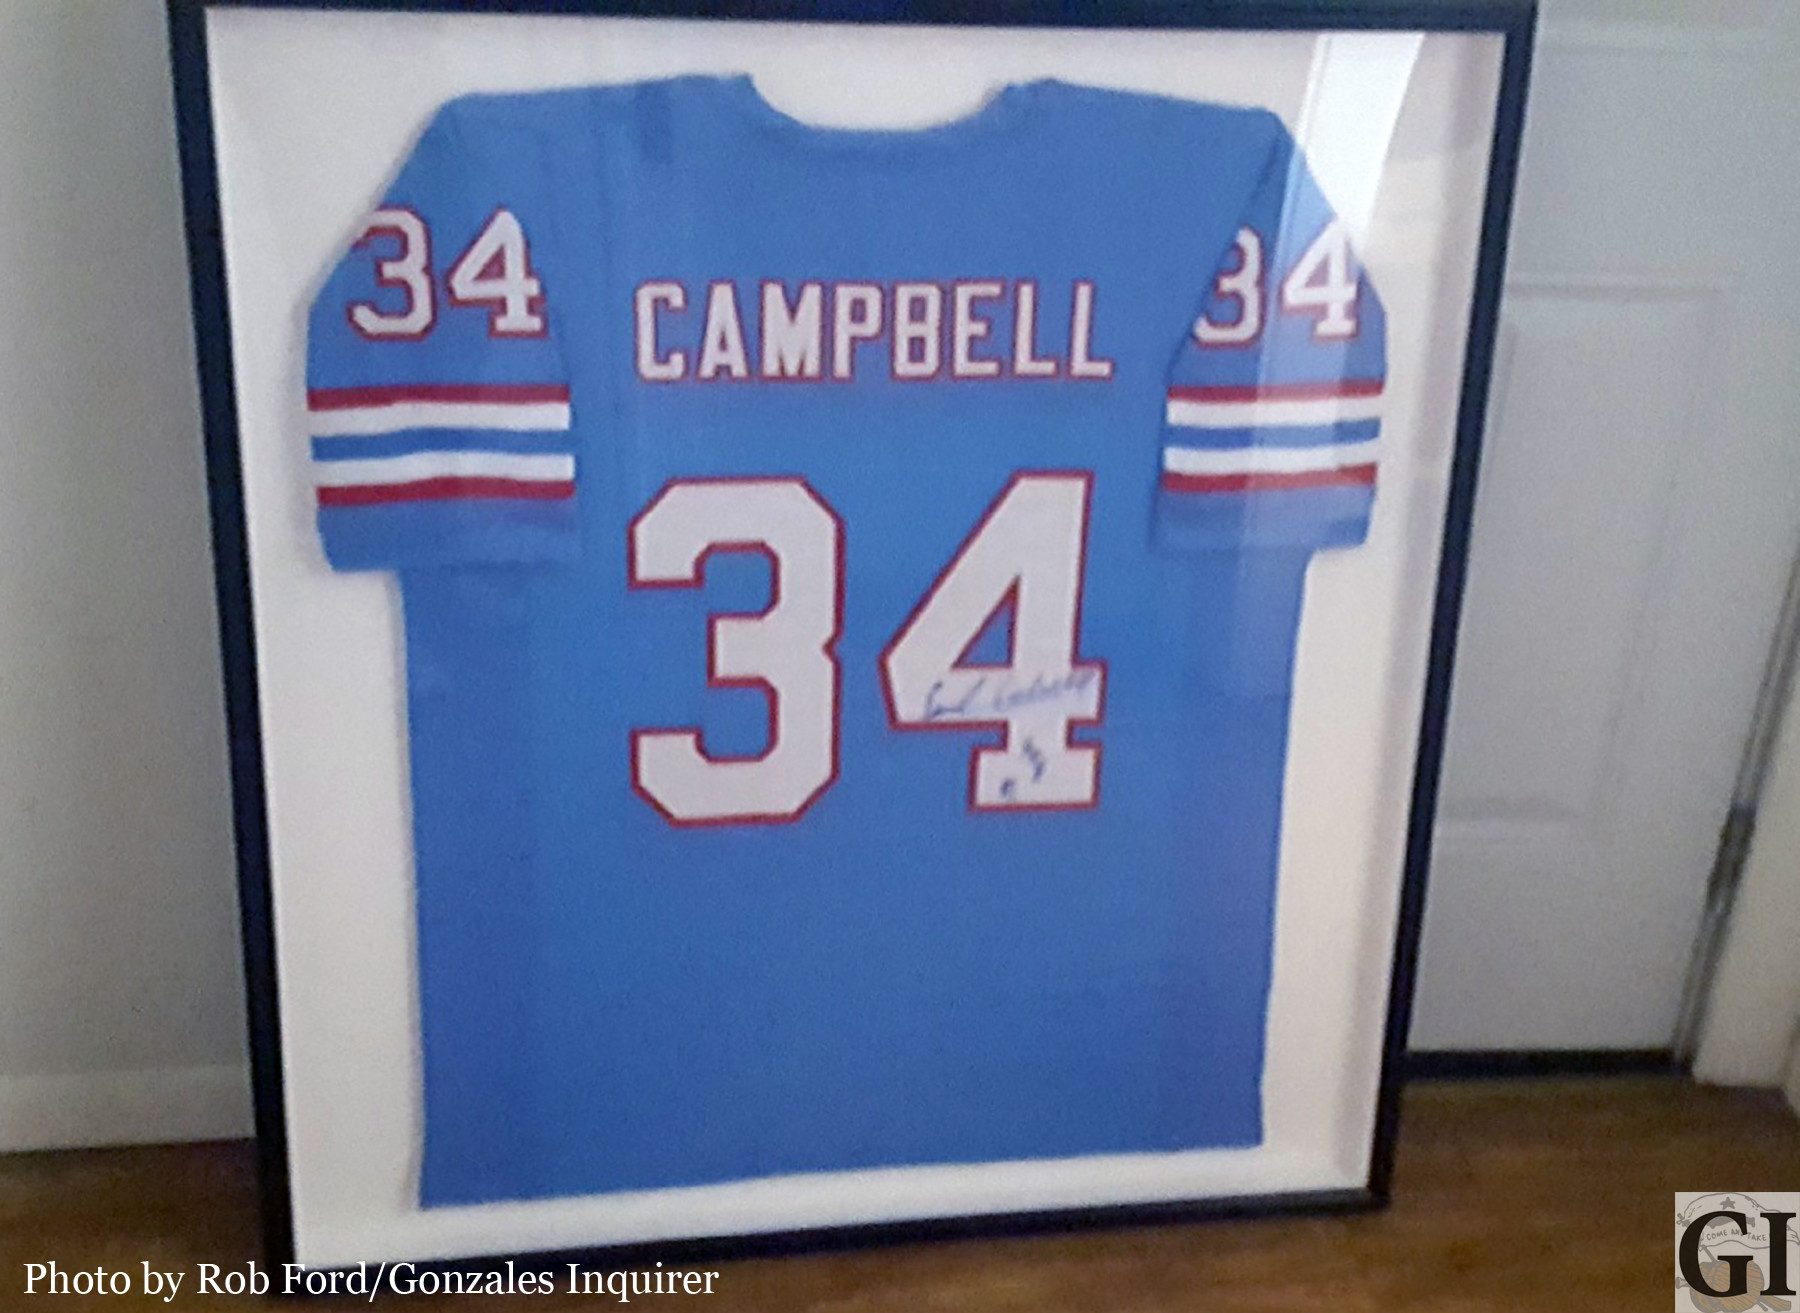 Carolyn Billings won this signed Earl Campbell jersey in the Gonzales Raffle Benefitting Silent Santa. She donated it to the Leesville County Fair auction in memory of Mark Billings.